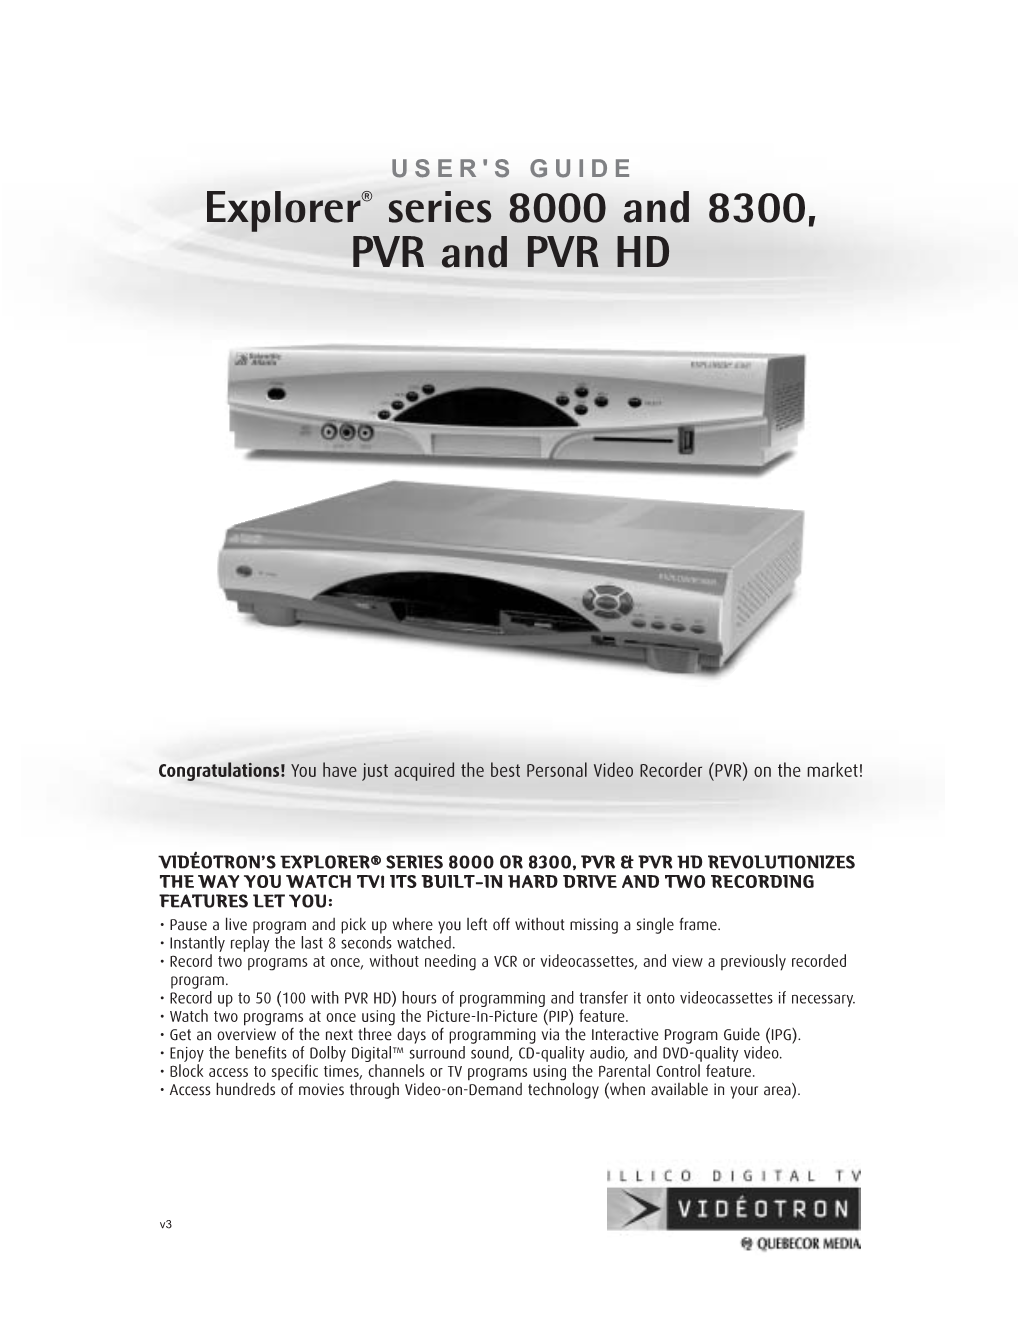 Explorer® Series 8000 and 8300, PVR and PVR HD